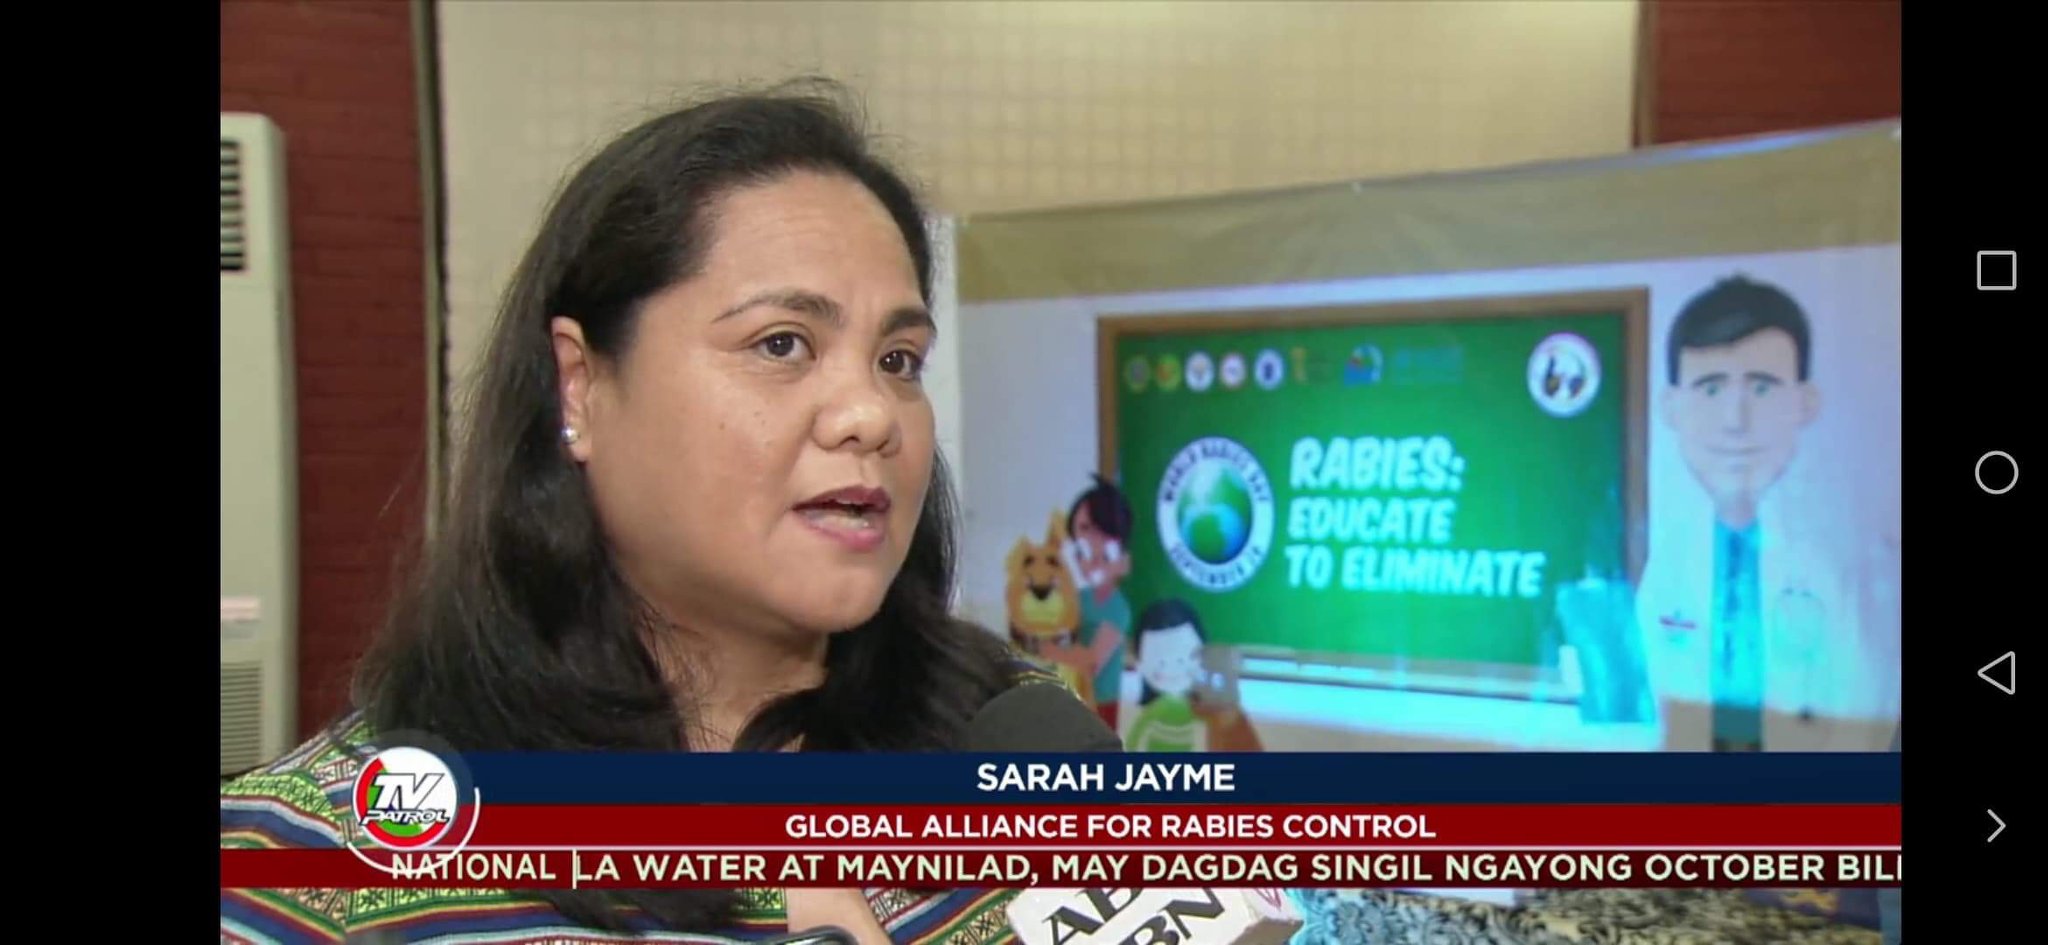 Dr Sarah Jayme of GARC participates in a TV interview about the education initiatives in the Philippines.